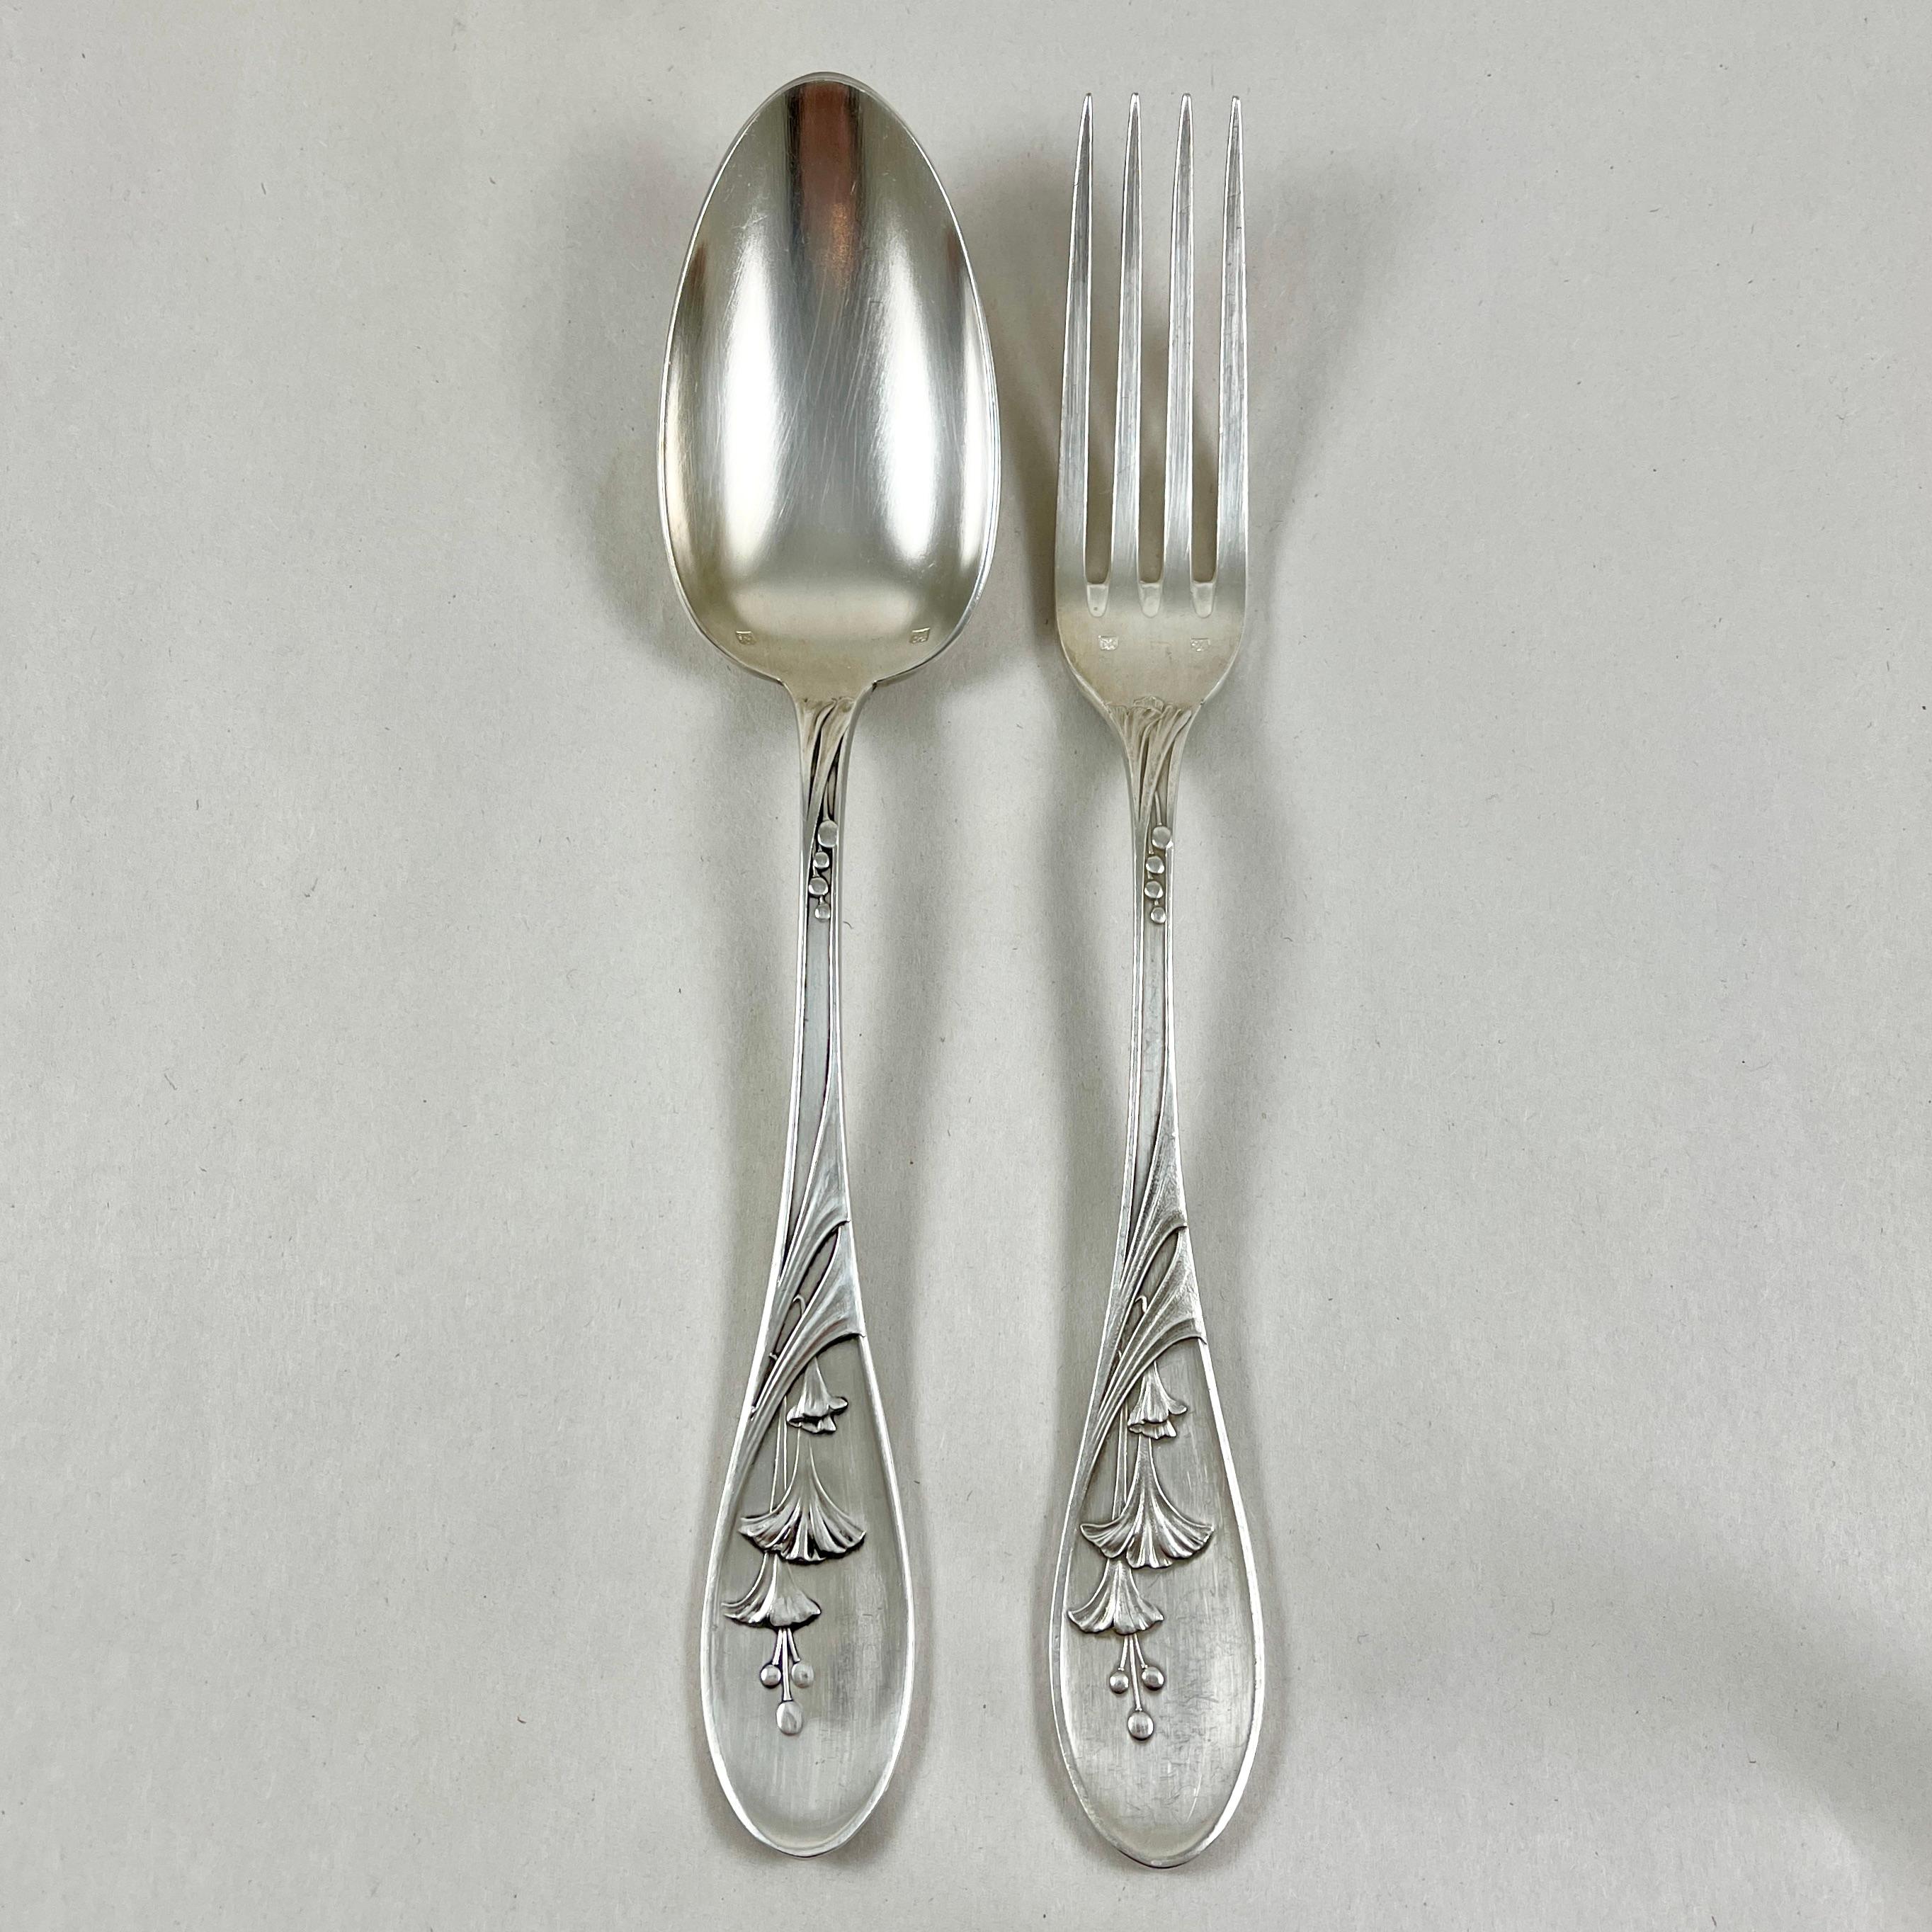 A set of twenty-four Art Nouveau period table forks and spoons made by Saglier Frères, circa 1900.

Scaled for the French table, oversized and heavy by todays standards, the silver plate service consists of twelve each dinner forks and spoons.